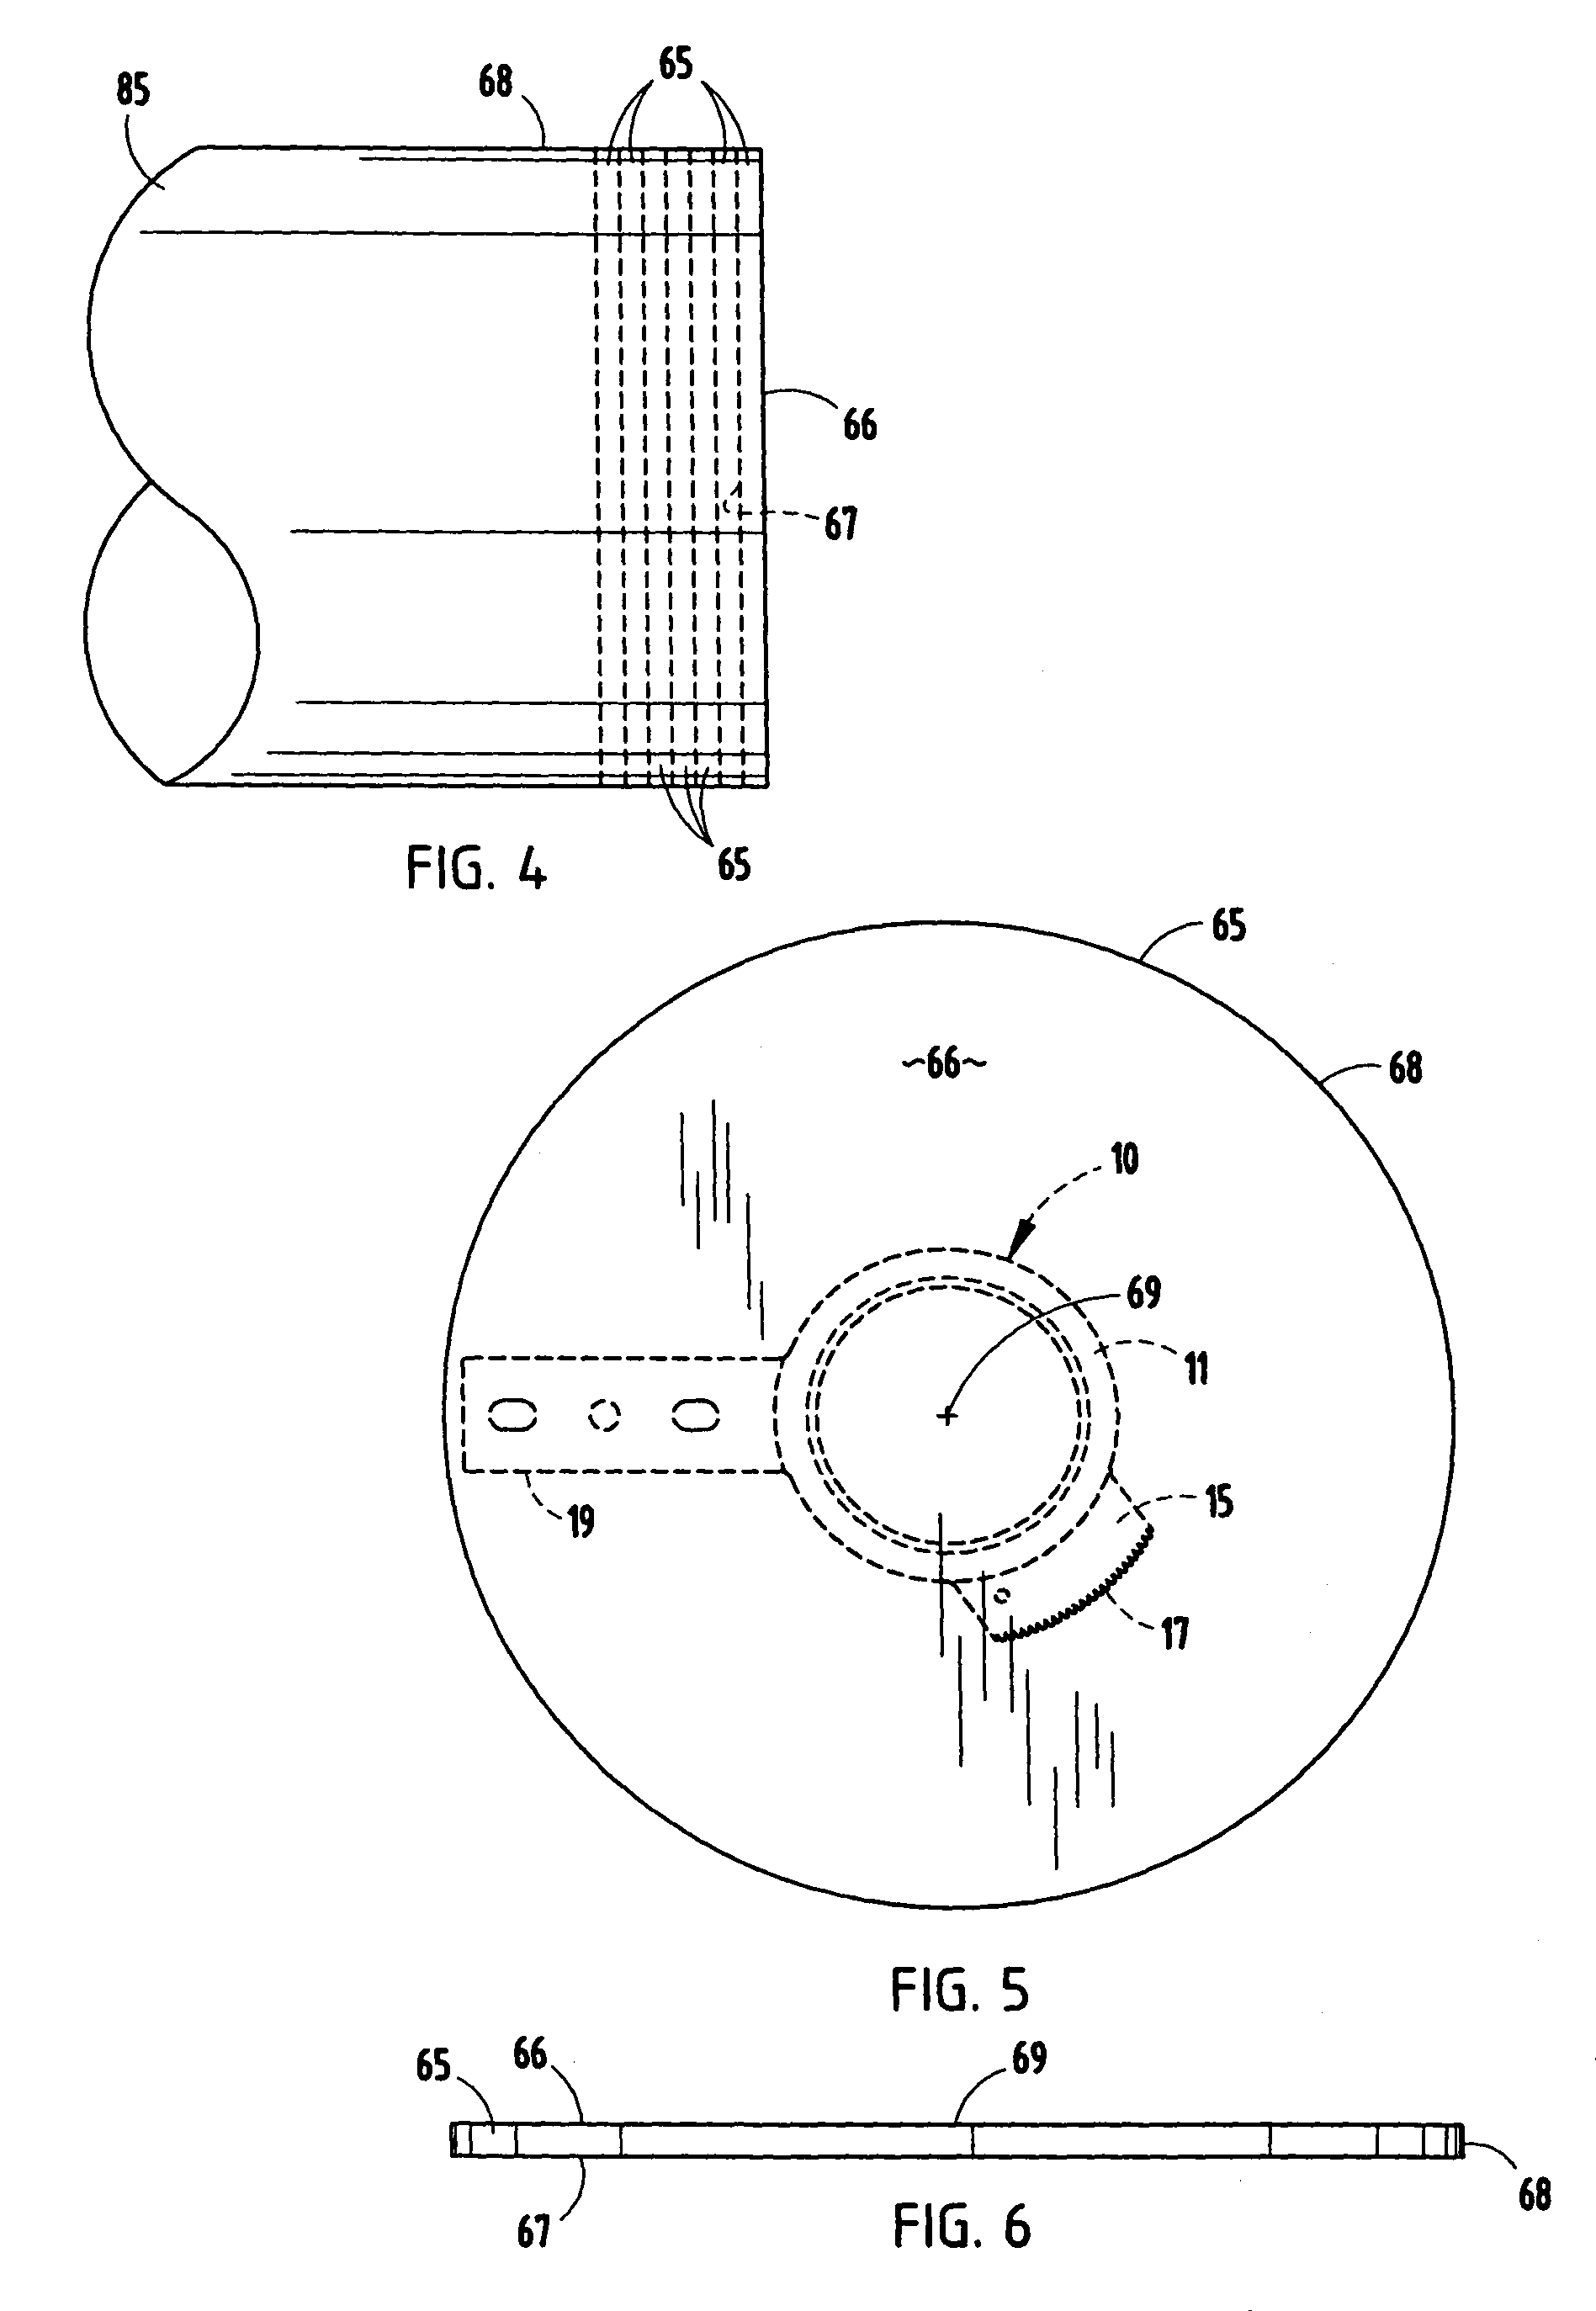 Method for making a pivot arm assembly for semiconductor wafer handling robots